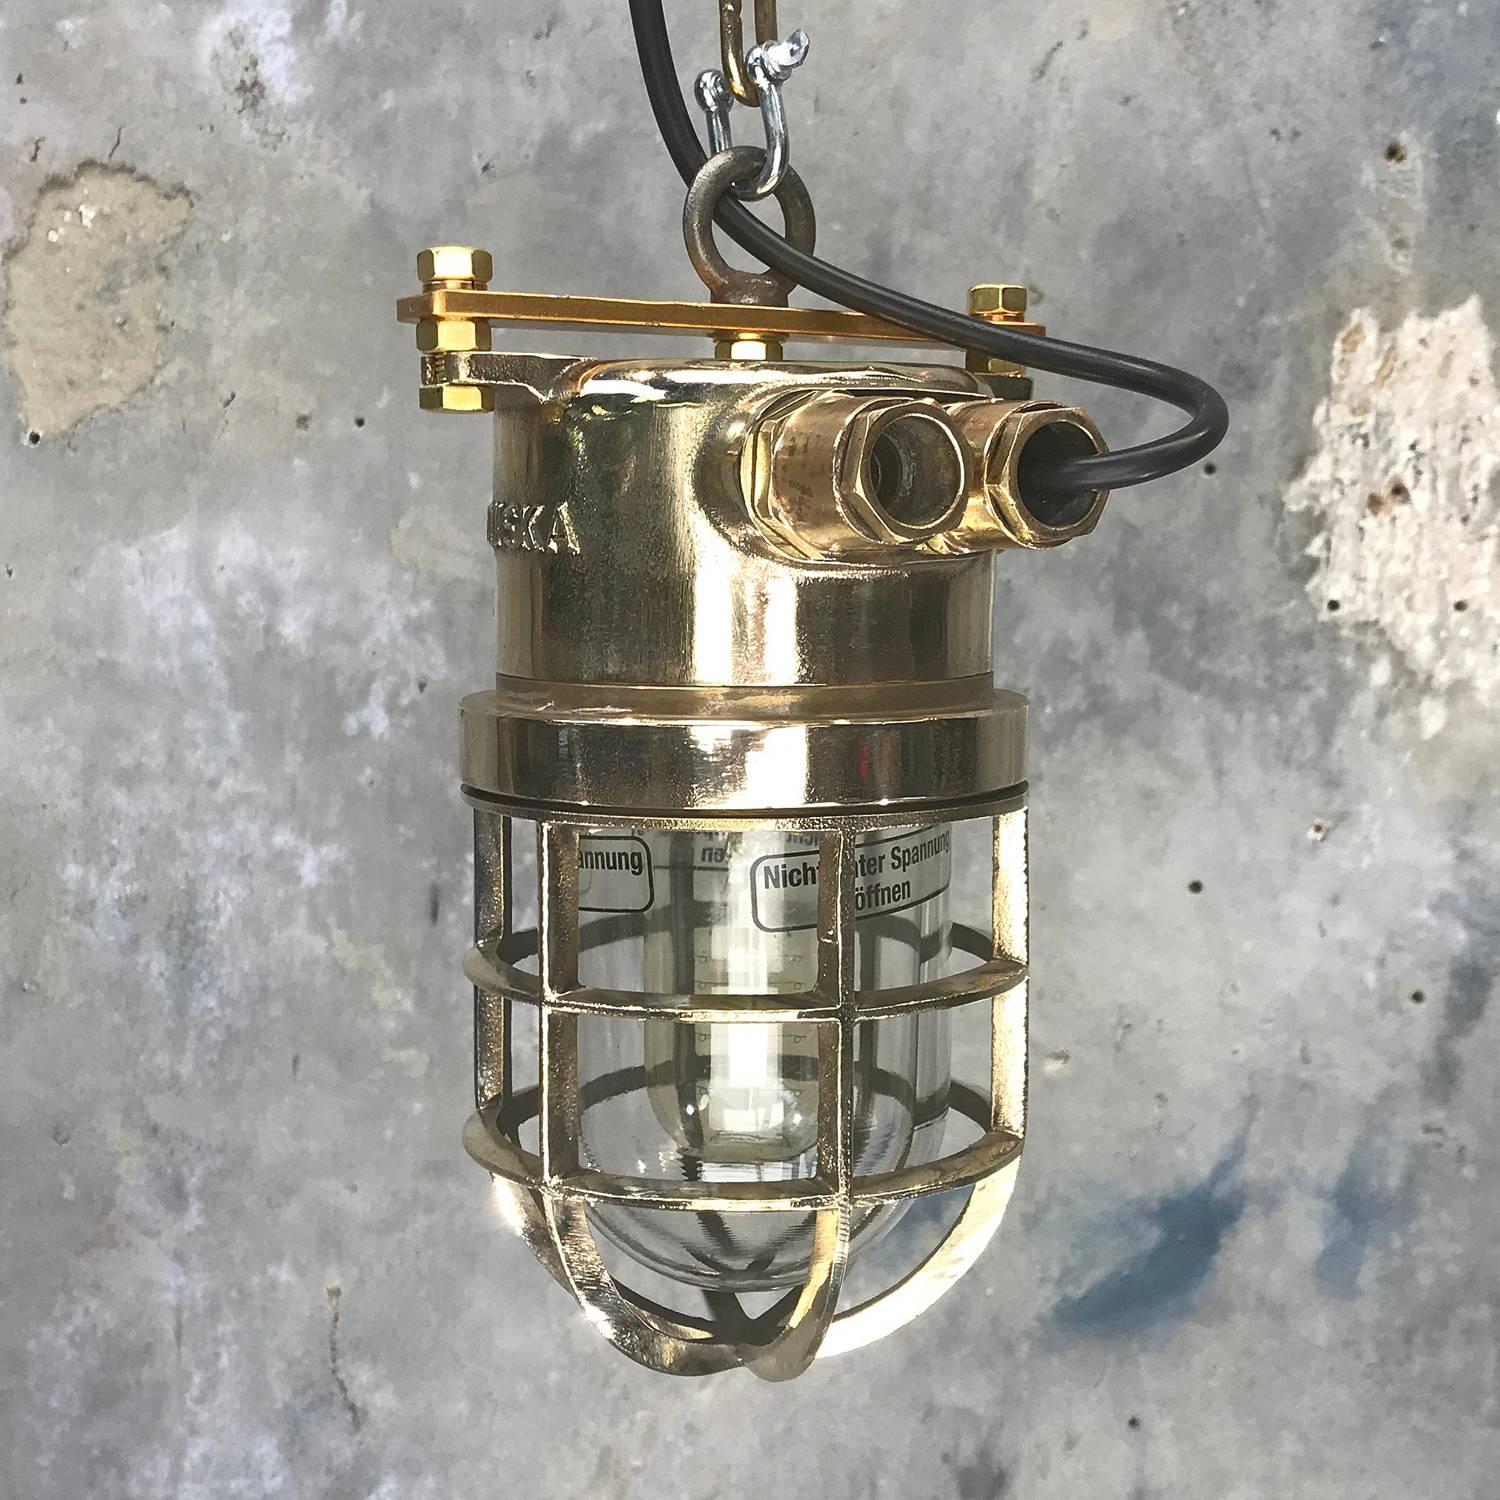 Late Century German Cast Brass and Glass Shade Explosion Proof Pendant Light In Excellent Condition For Sale In Leicester, Leicestershire